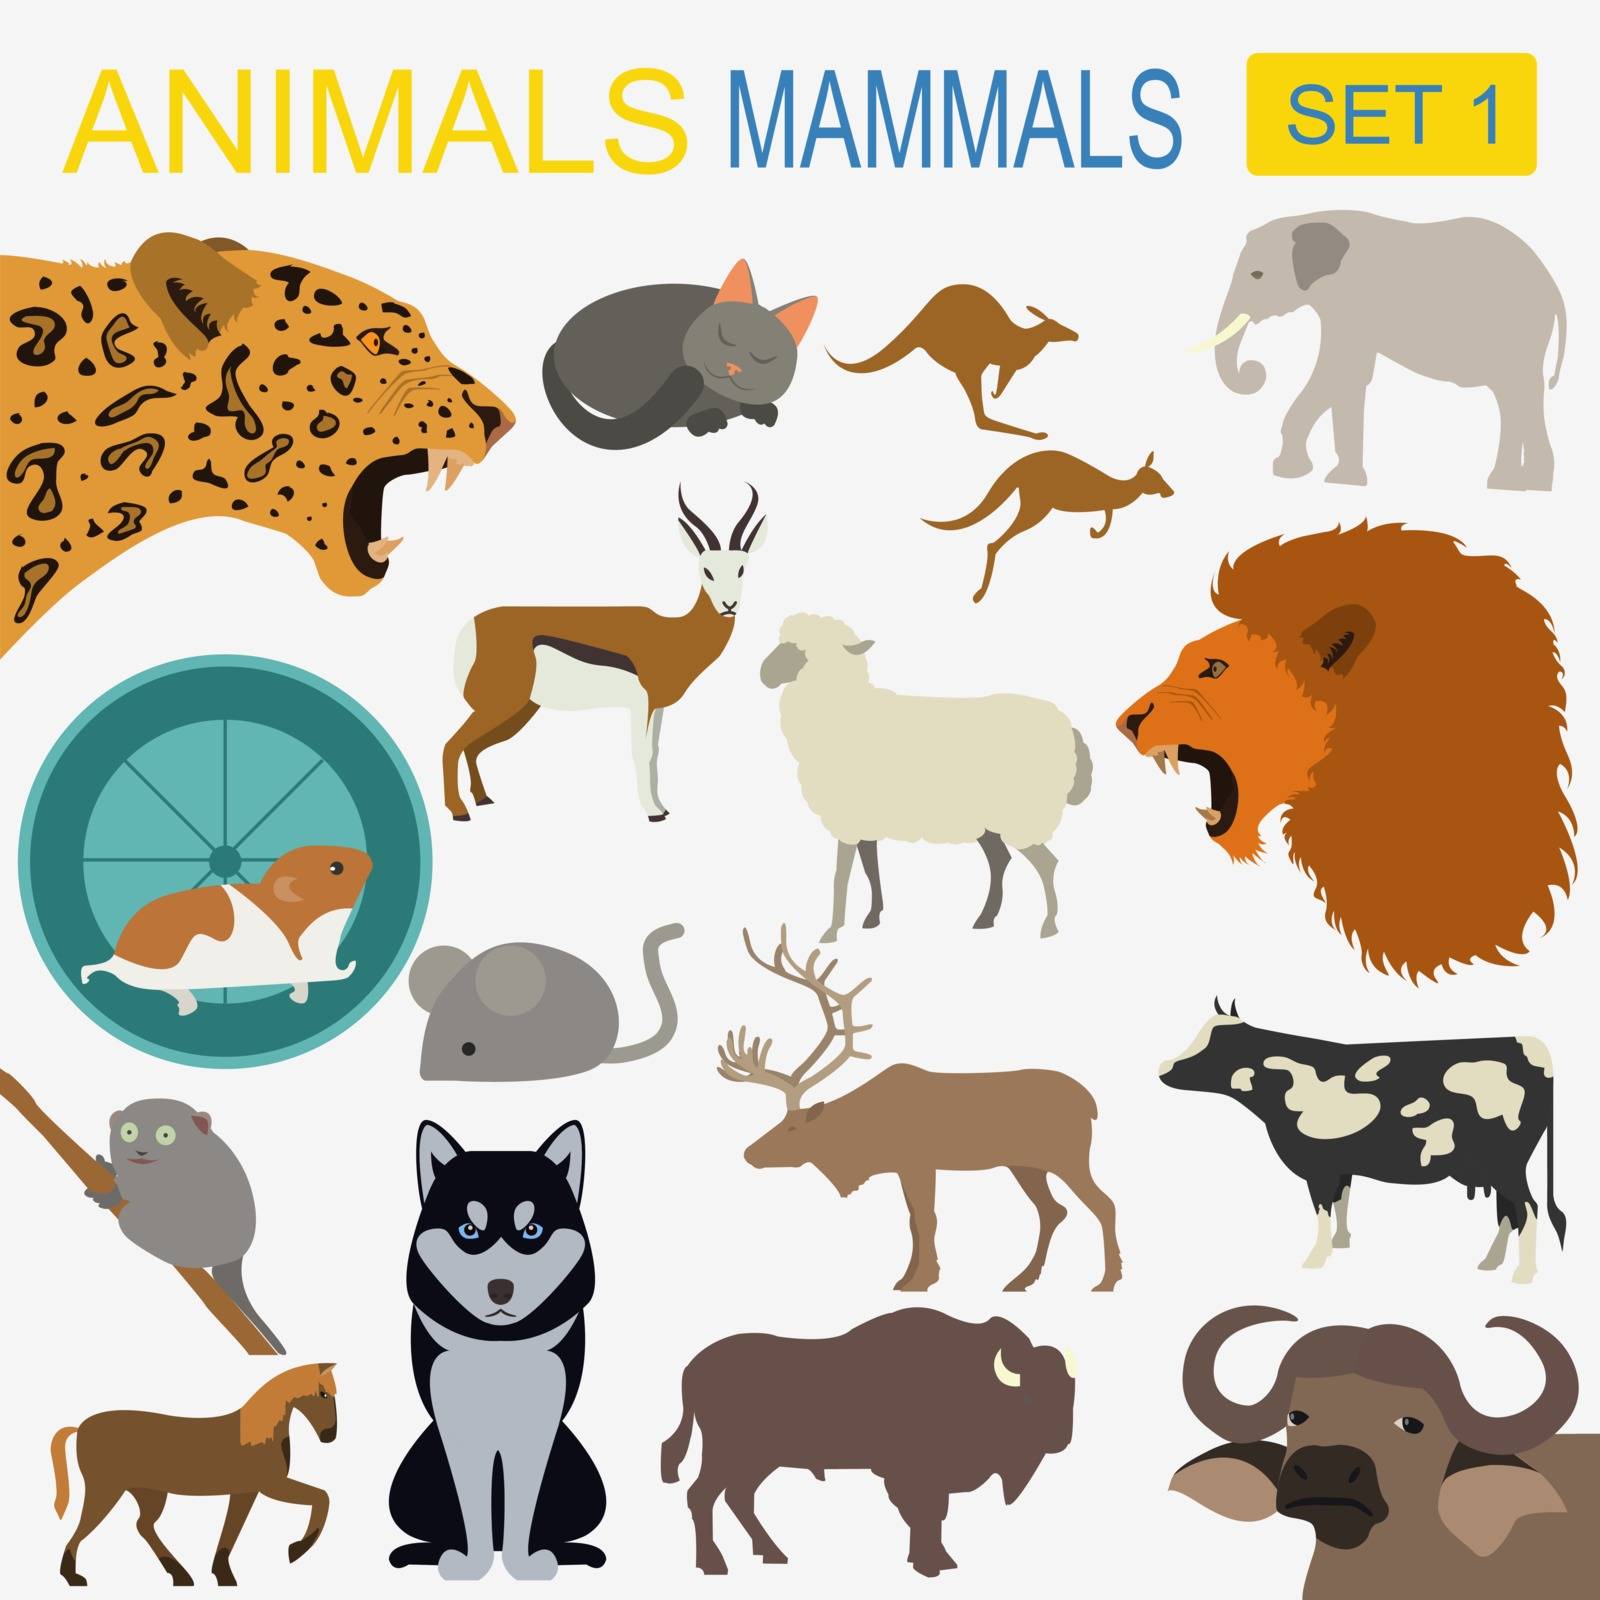 Animals mammals icon set. Vector flat style by A7880S